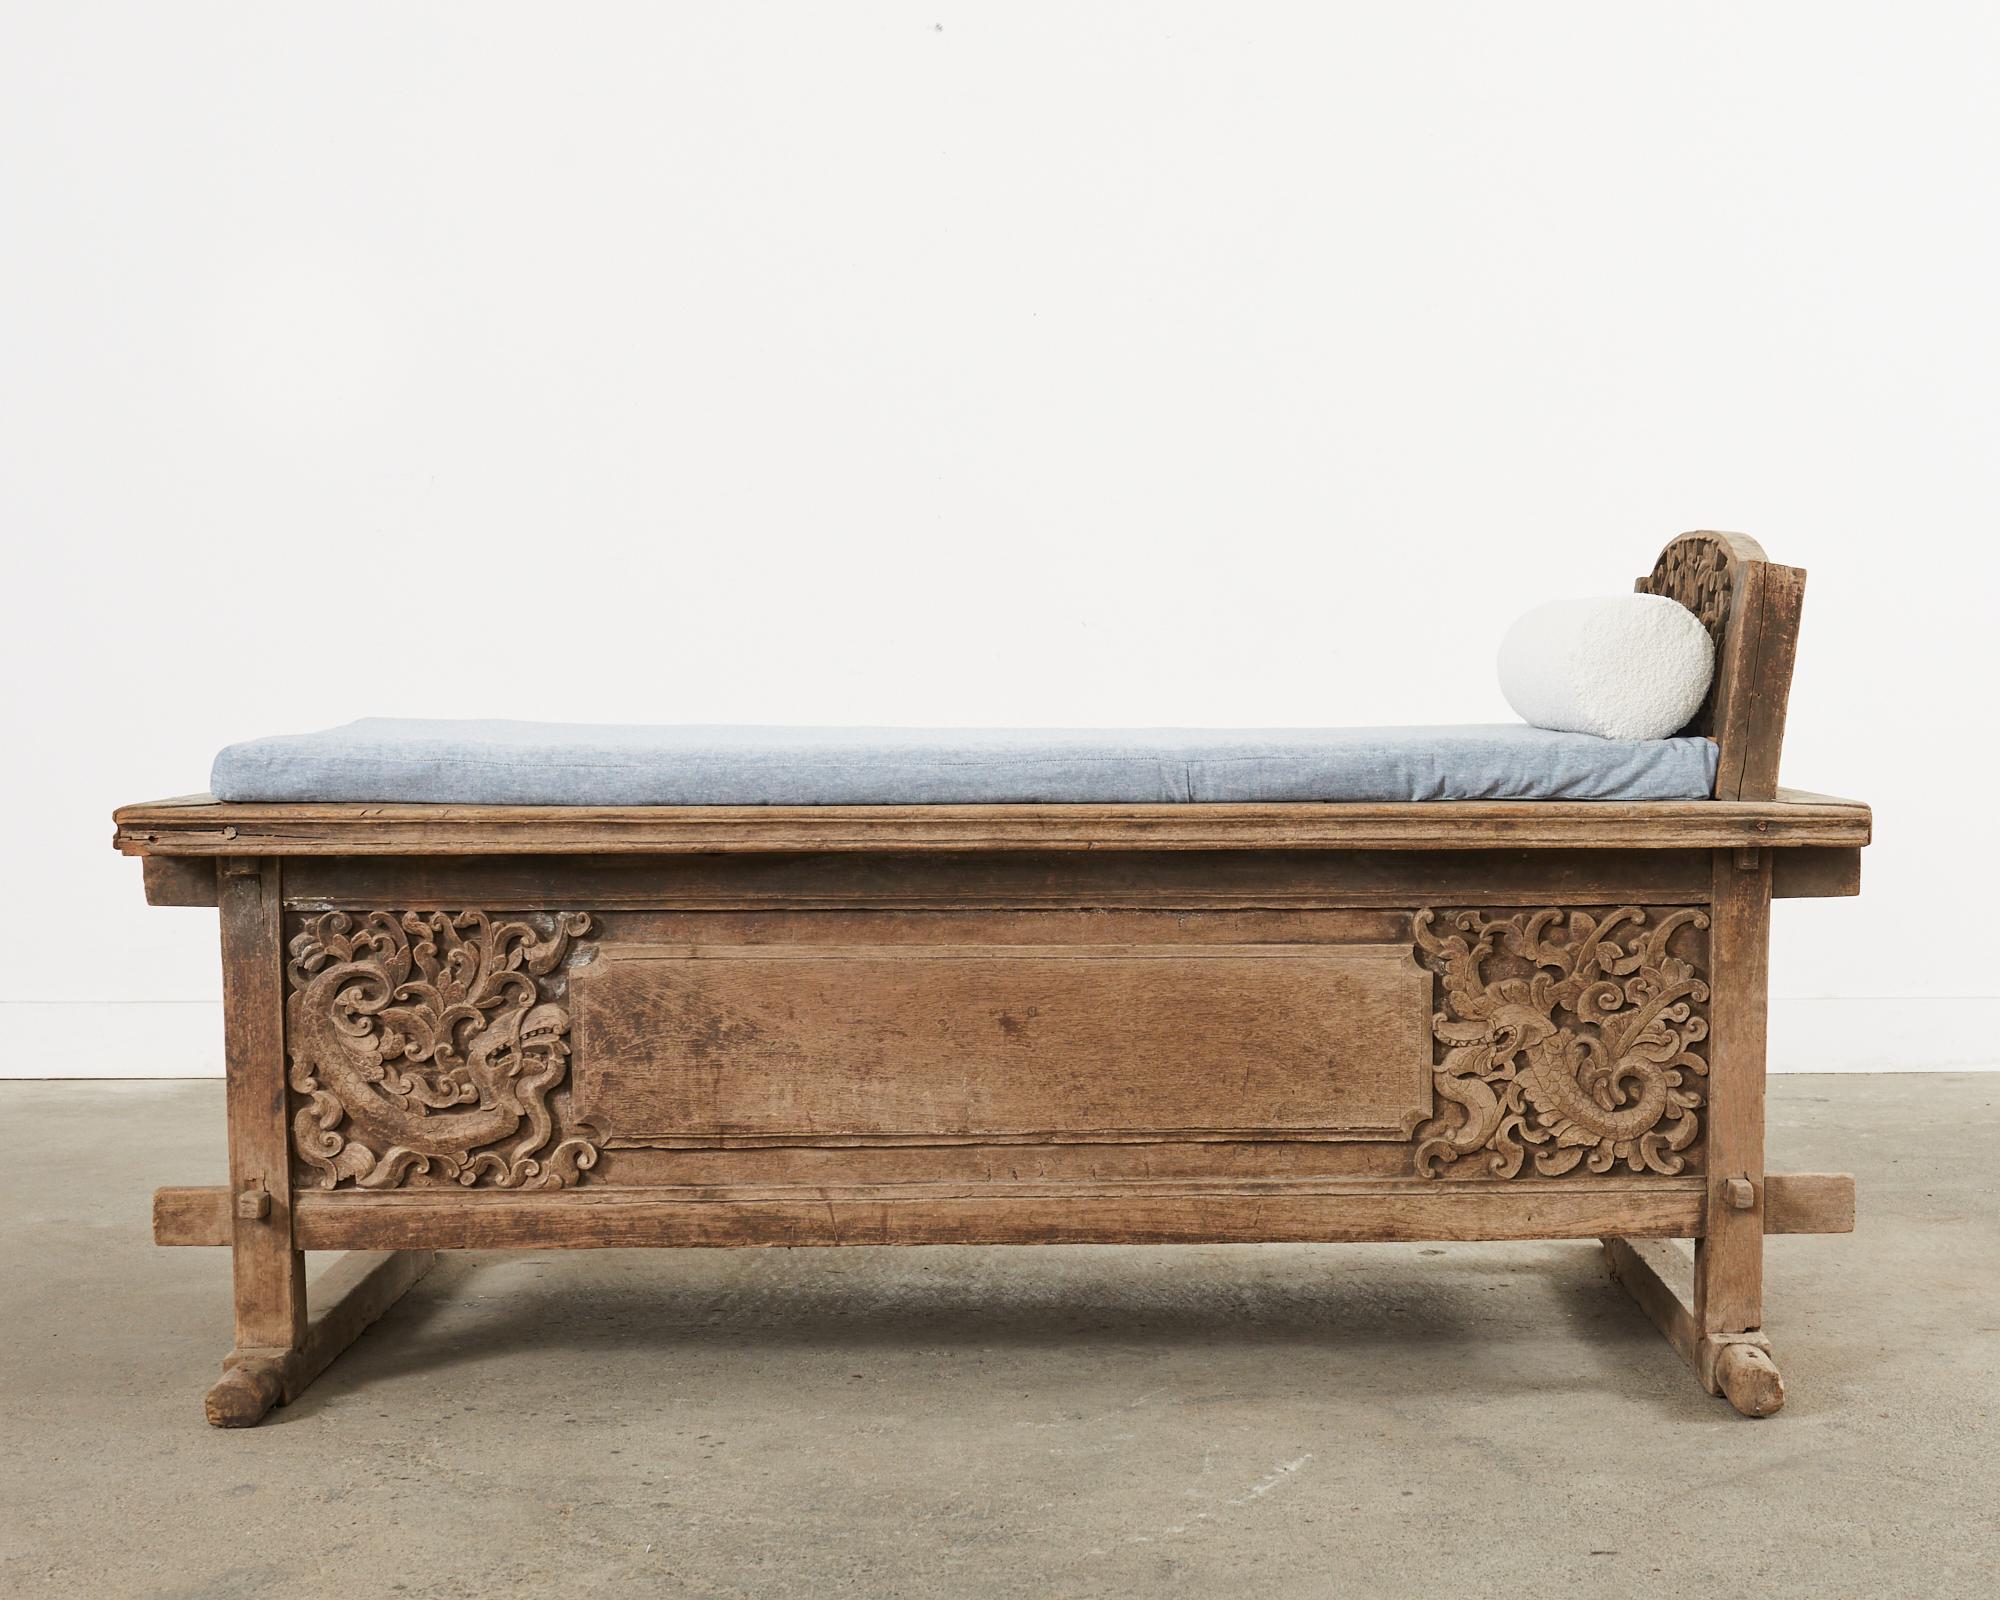 Indonesian Javanese Carved Teak Indo Wedding Chest Daybed from Bali For Sale